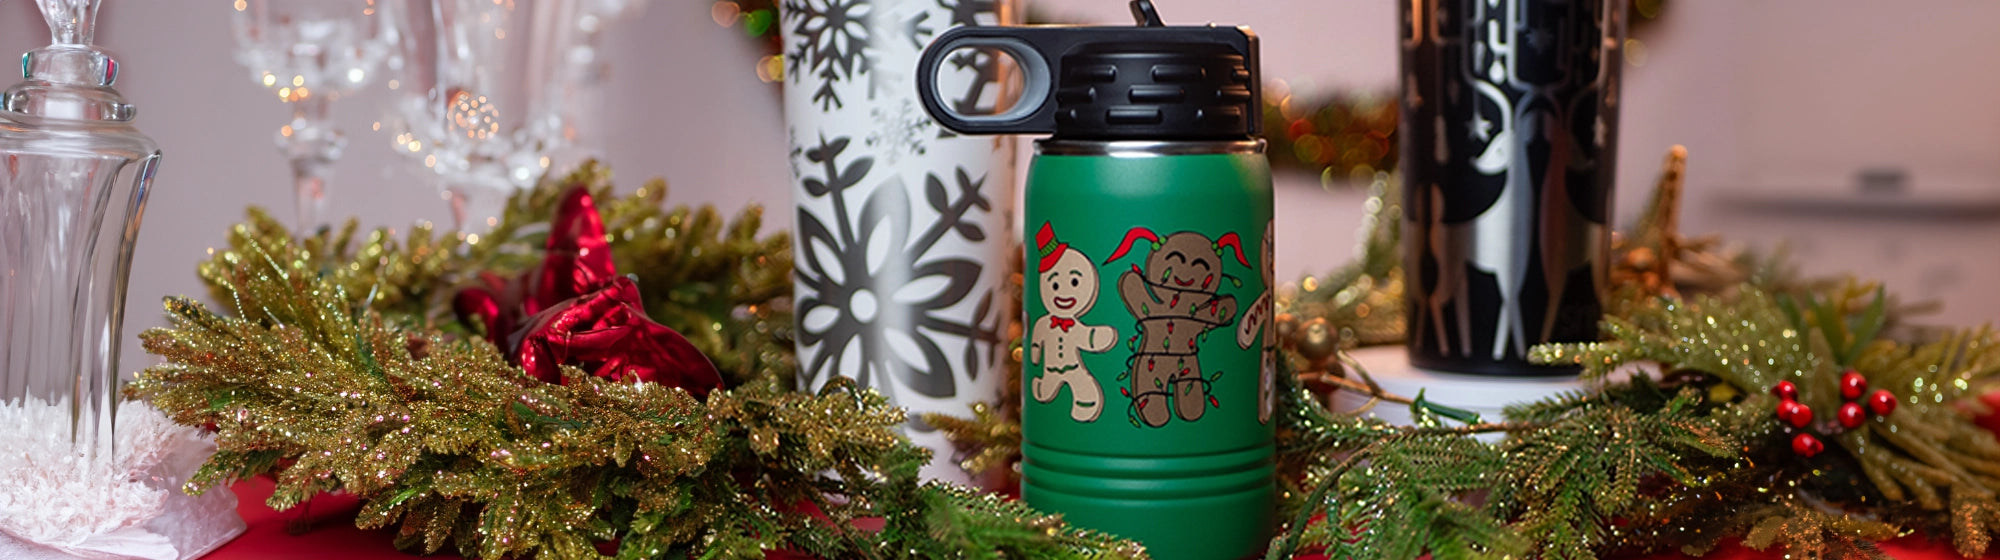 Insulated water bottles and cups from custom branding.  Designs include gingerbread men, snowflakes and reindeer wraps.